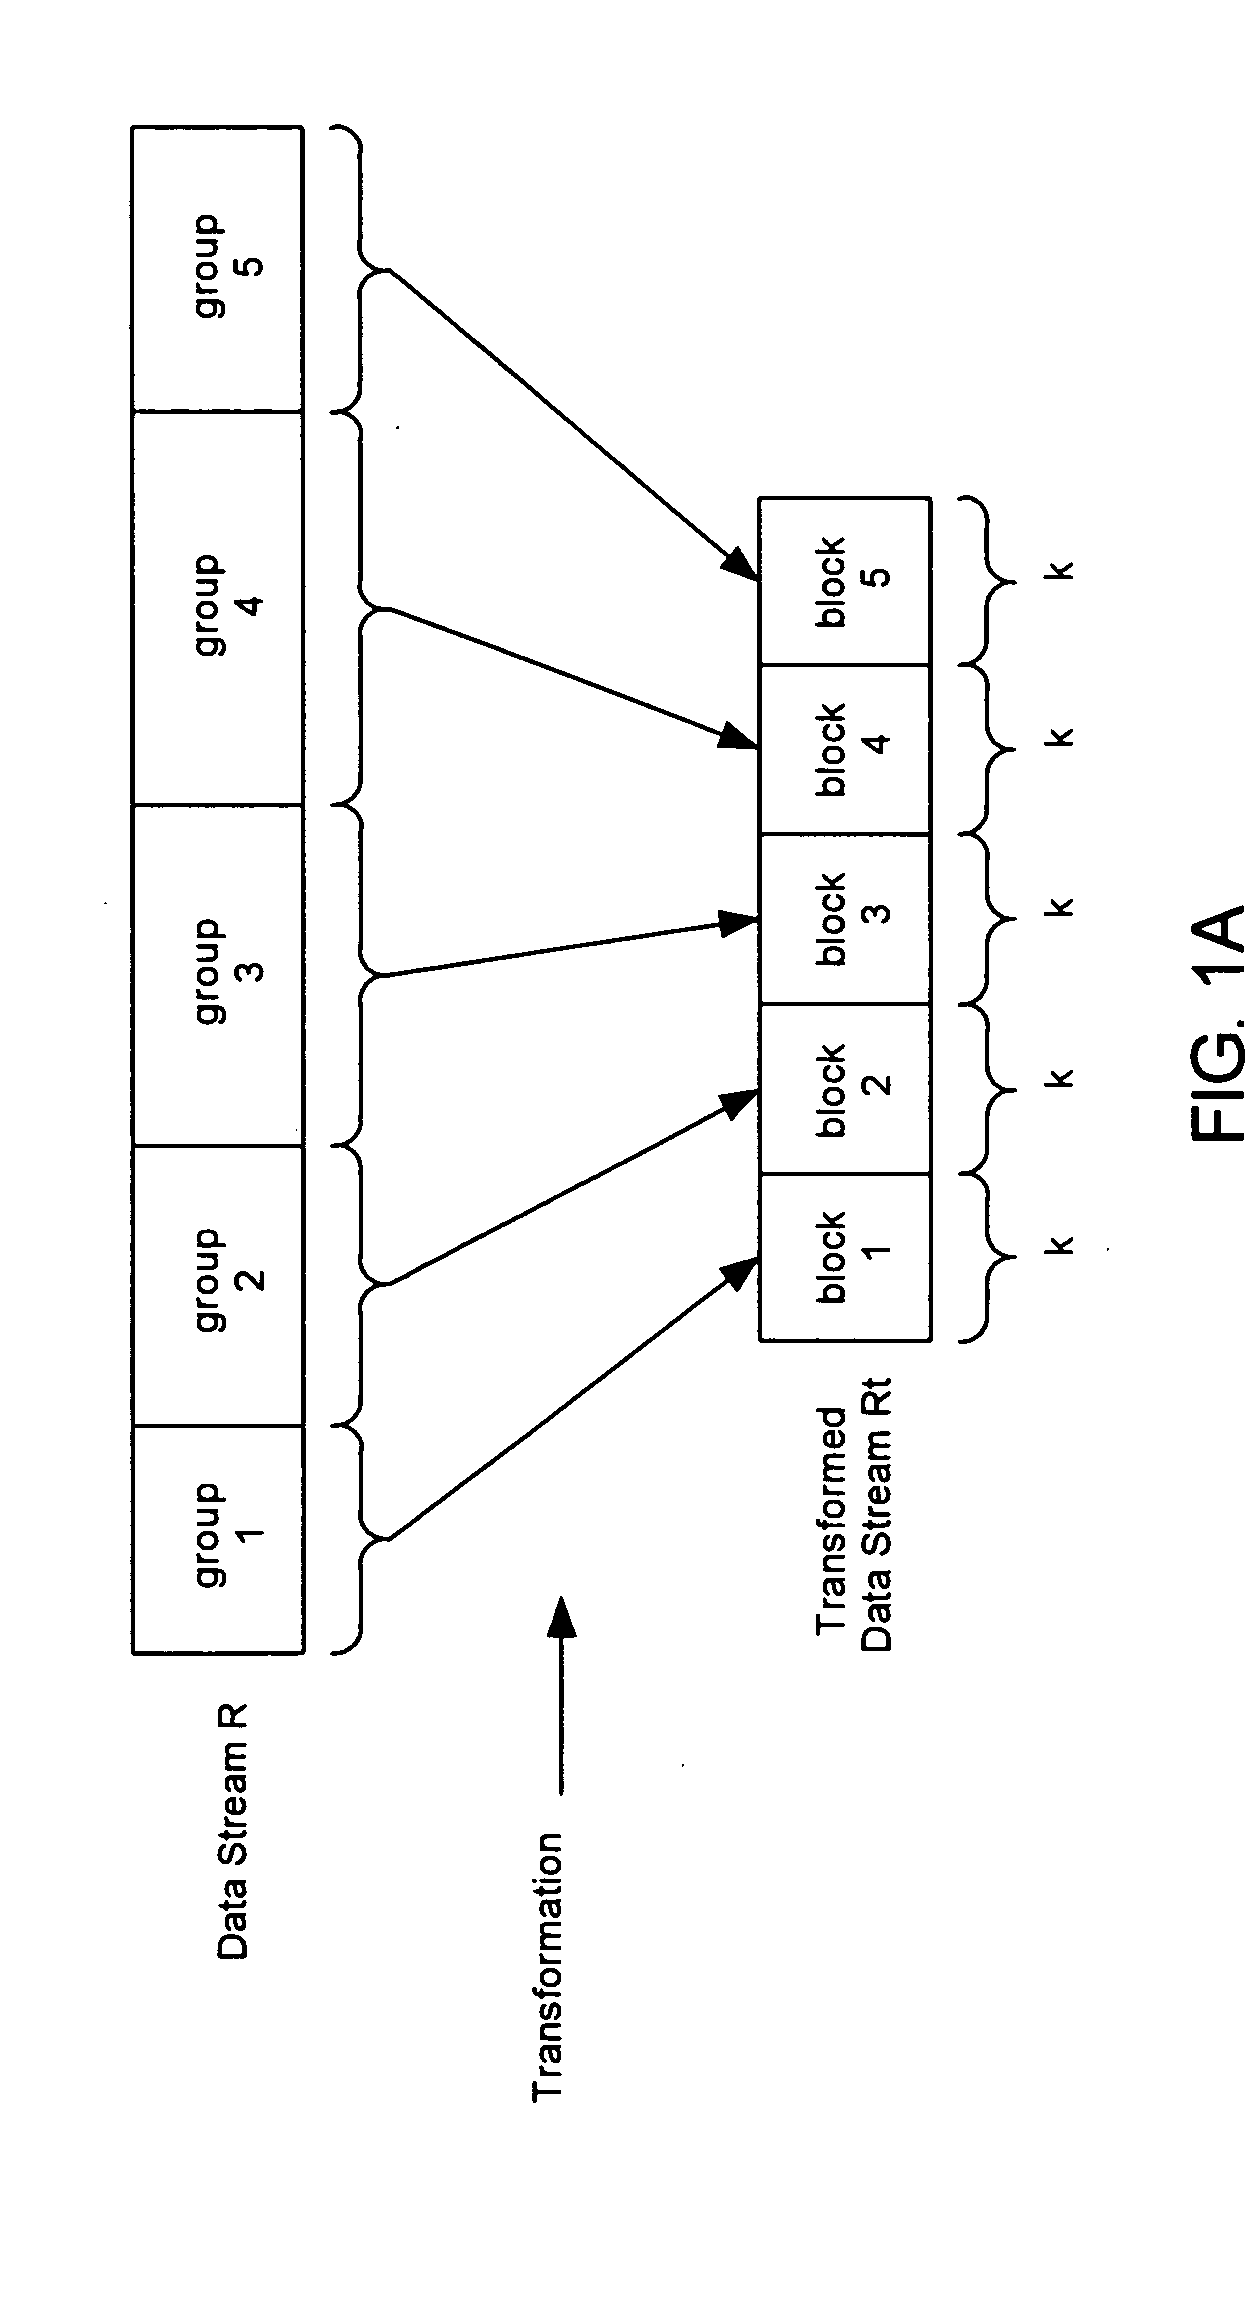 System and method for performing compression/encryption on data such that the number of duplicate blocks in the transformed data is increased